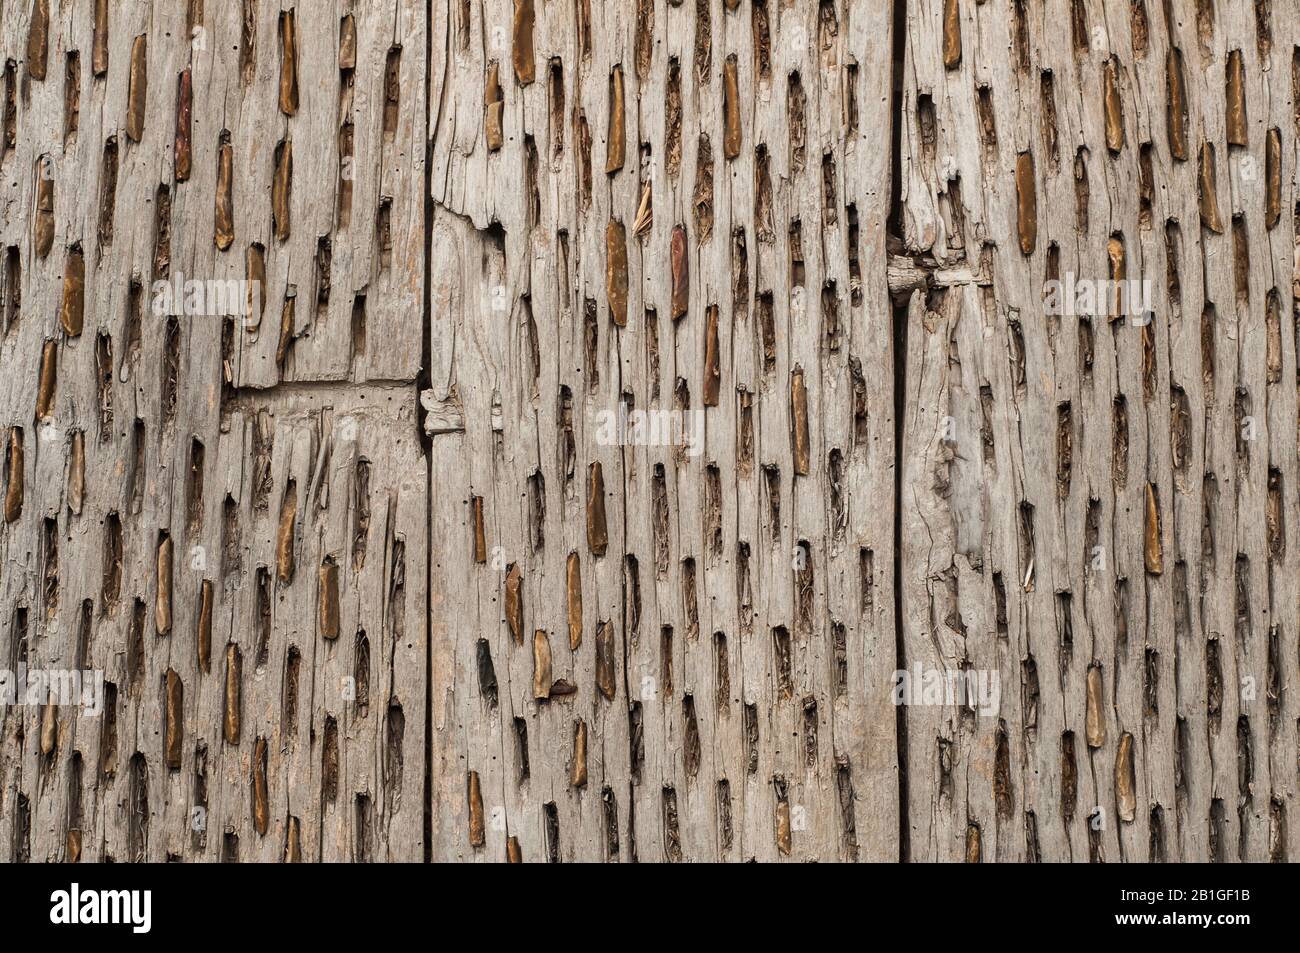 Bottom view of Spanish threshing board closeup as rural wooden background Stock Photo